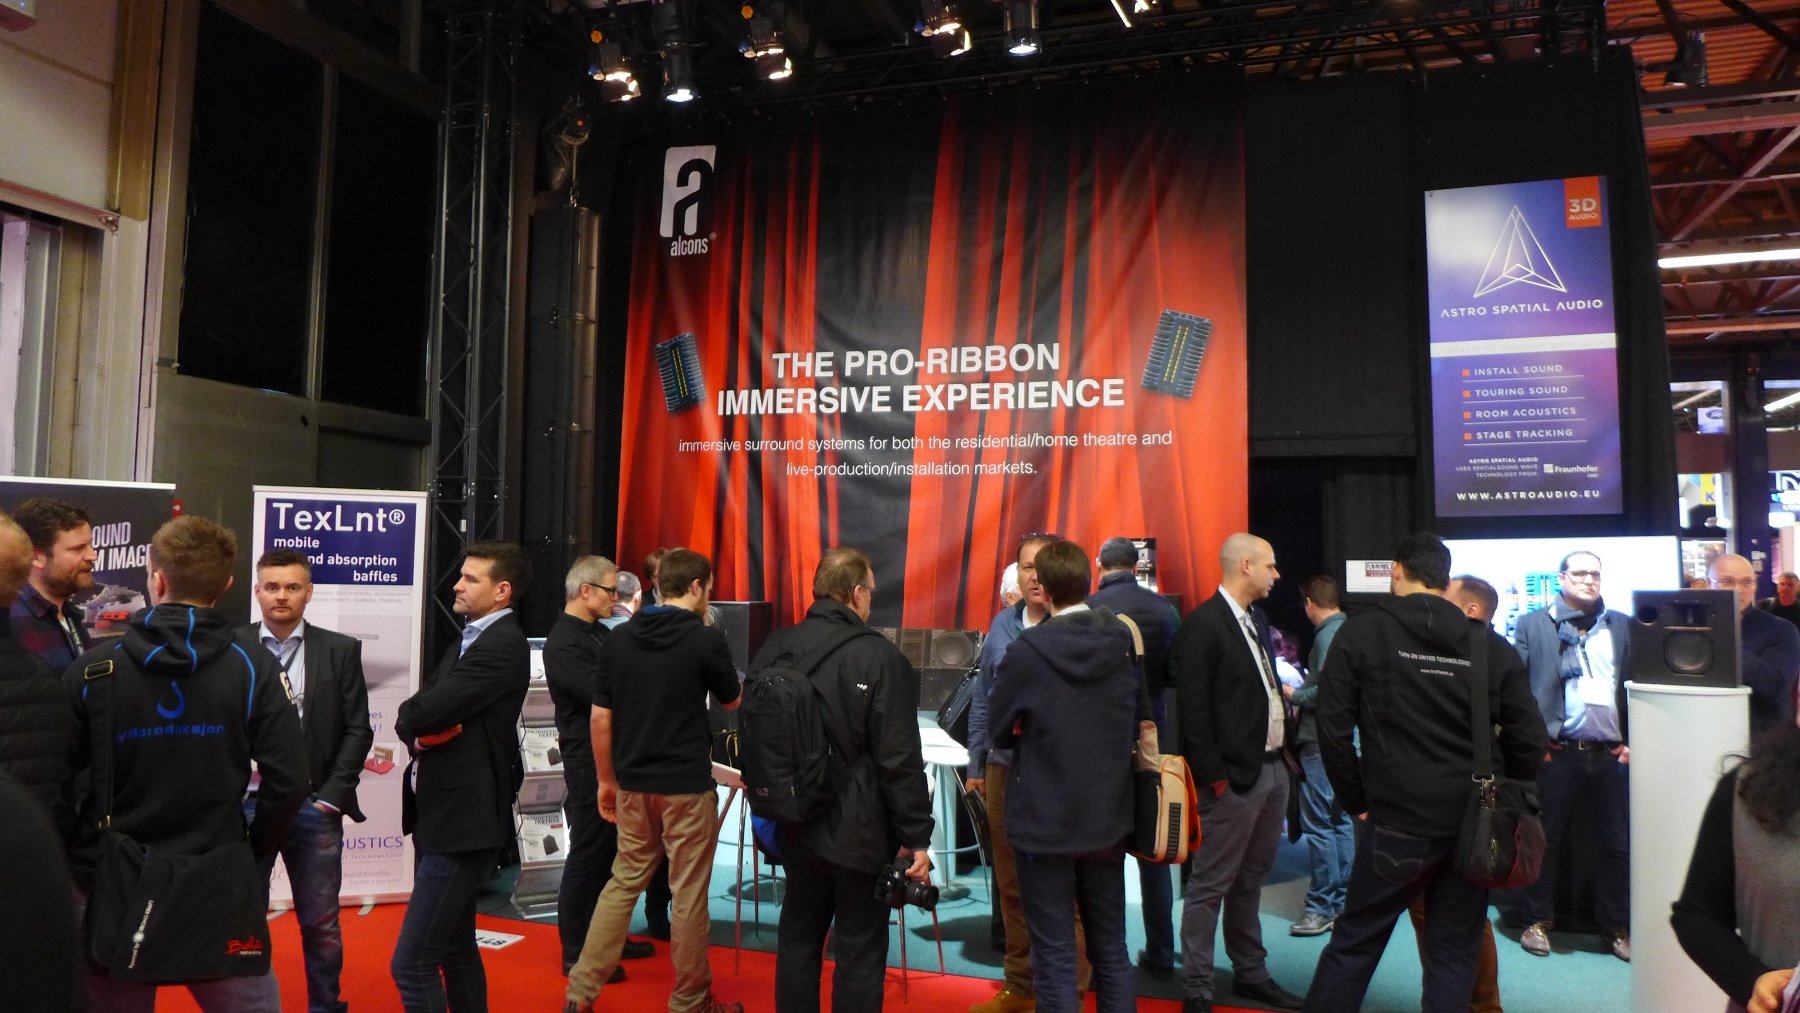 Pro-Ribbon Immersive Experience Gains New Fans @ ISE - Alcons Audio